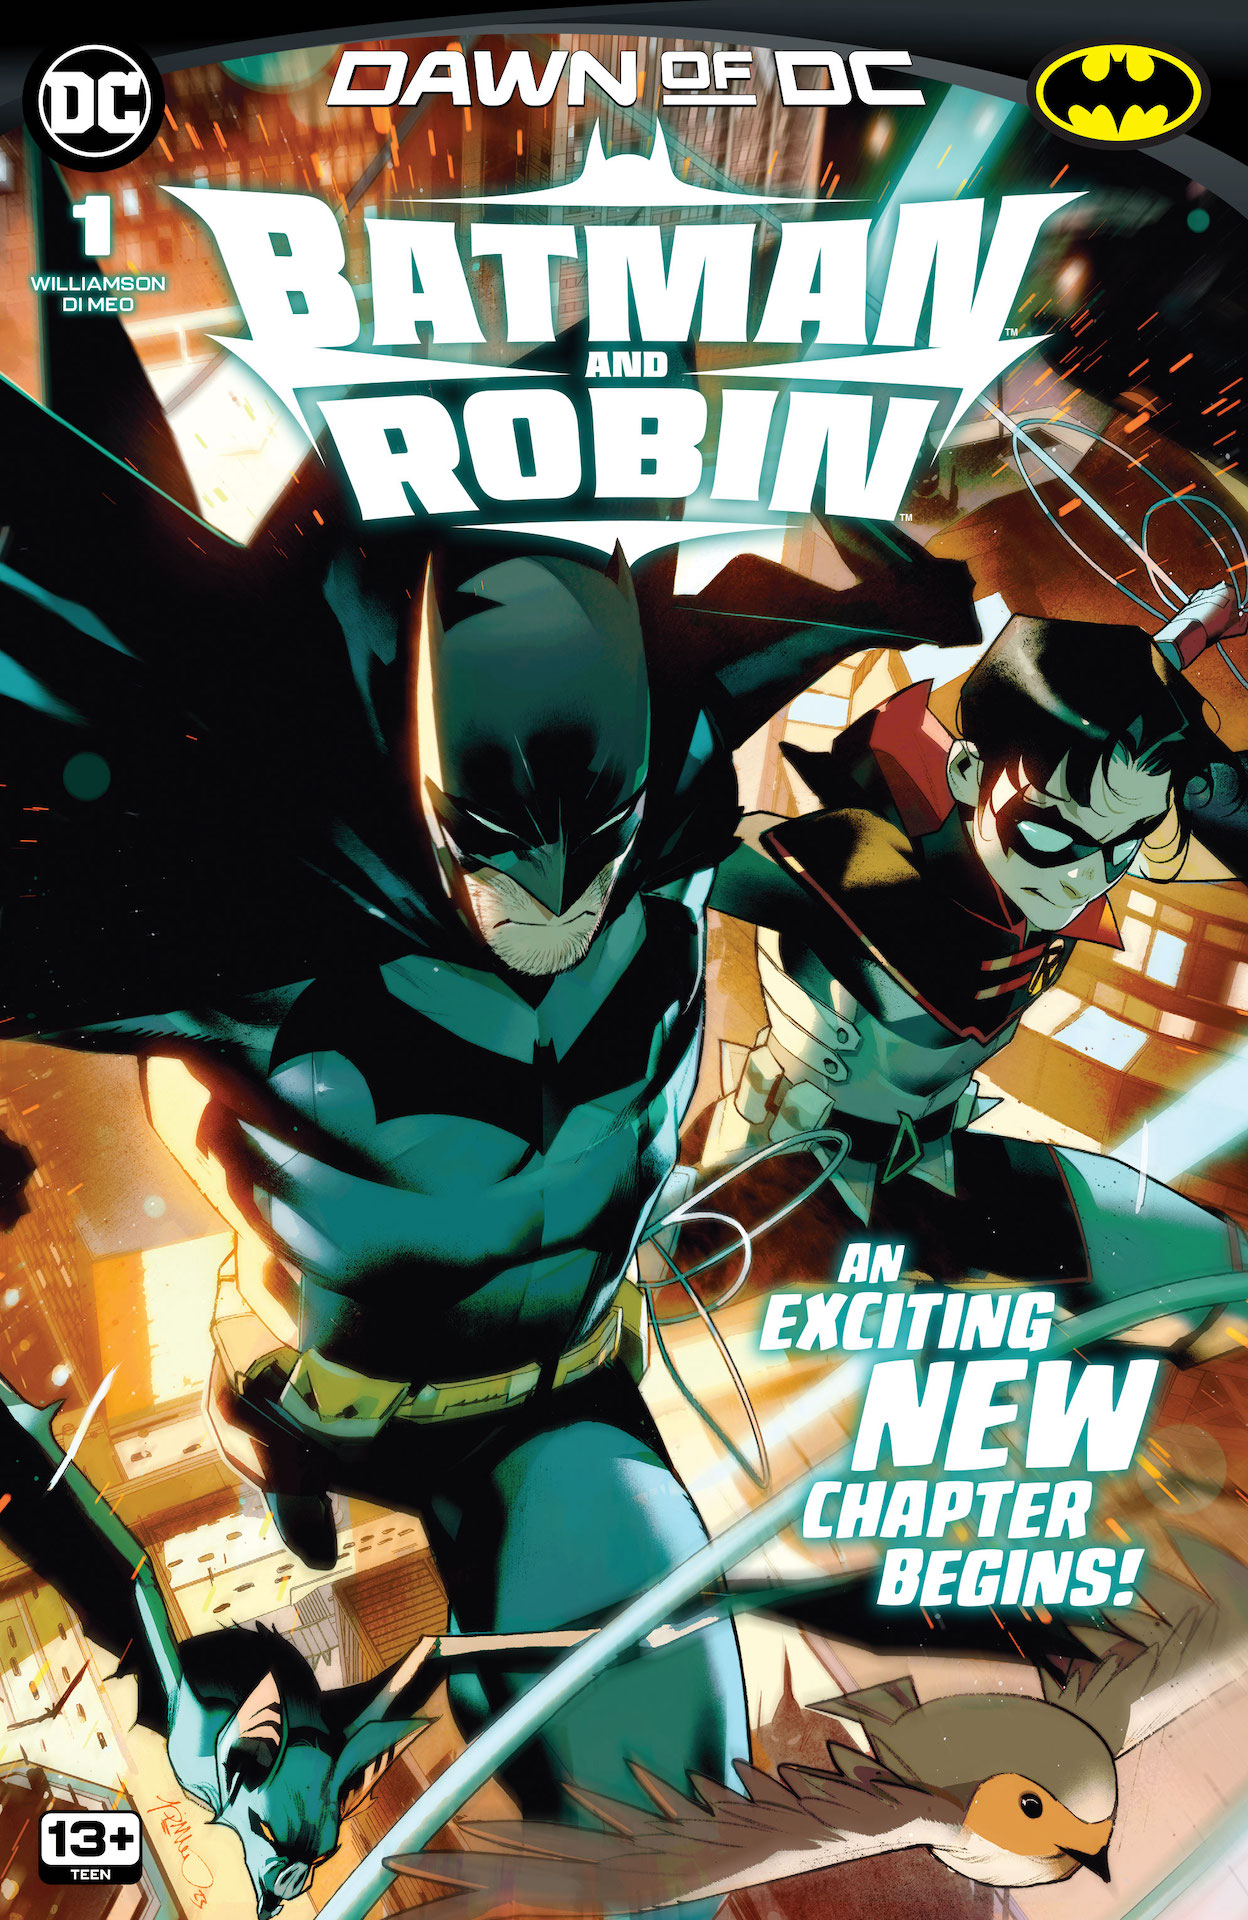 DC Preview: Batman and Robin #1